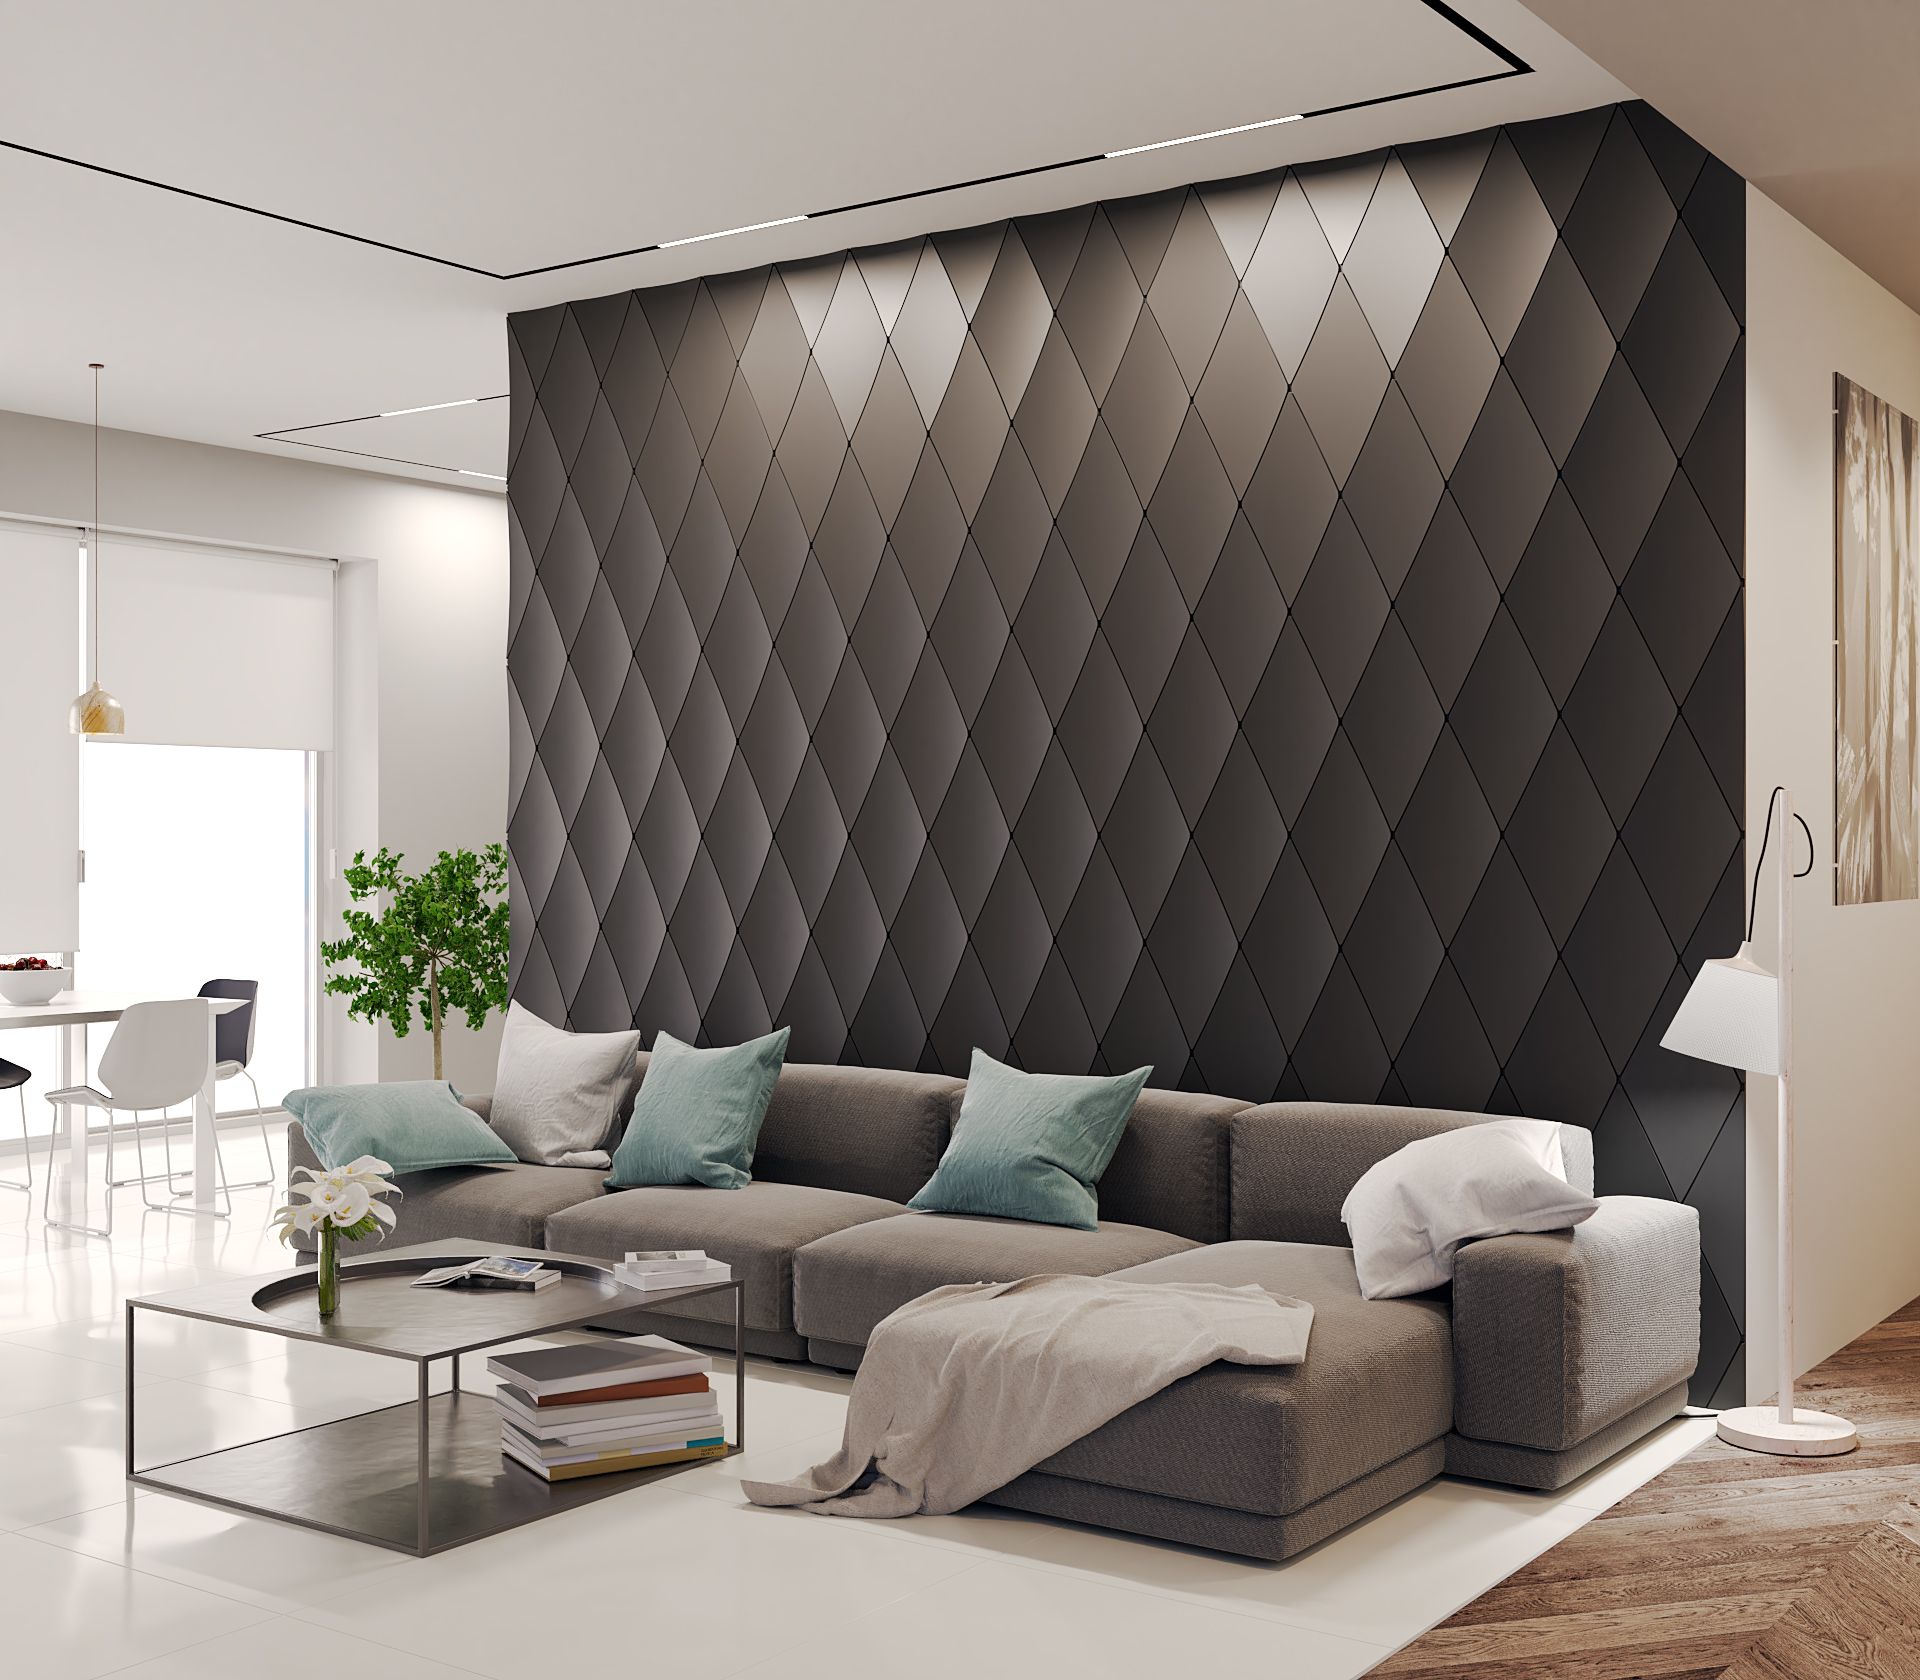 How to Jazz Up Your Home's Interiors with 3D Wall Panels - Go Get Yourself